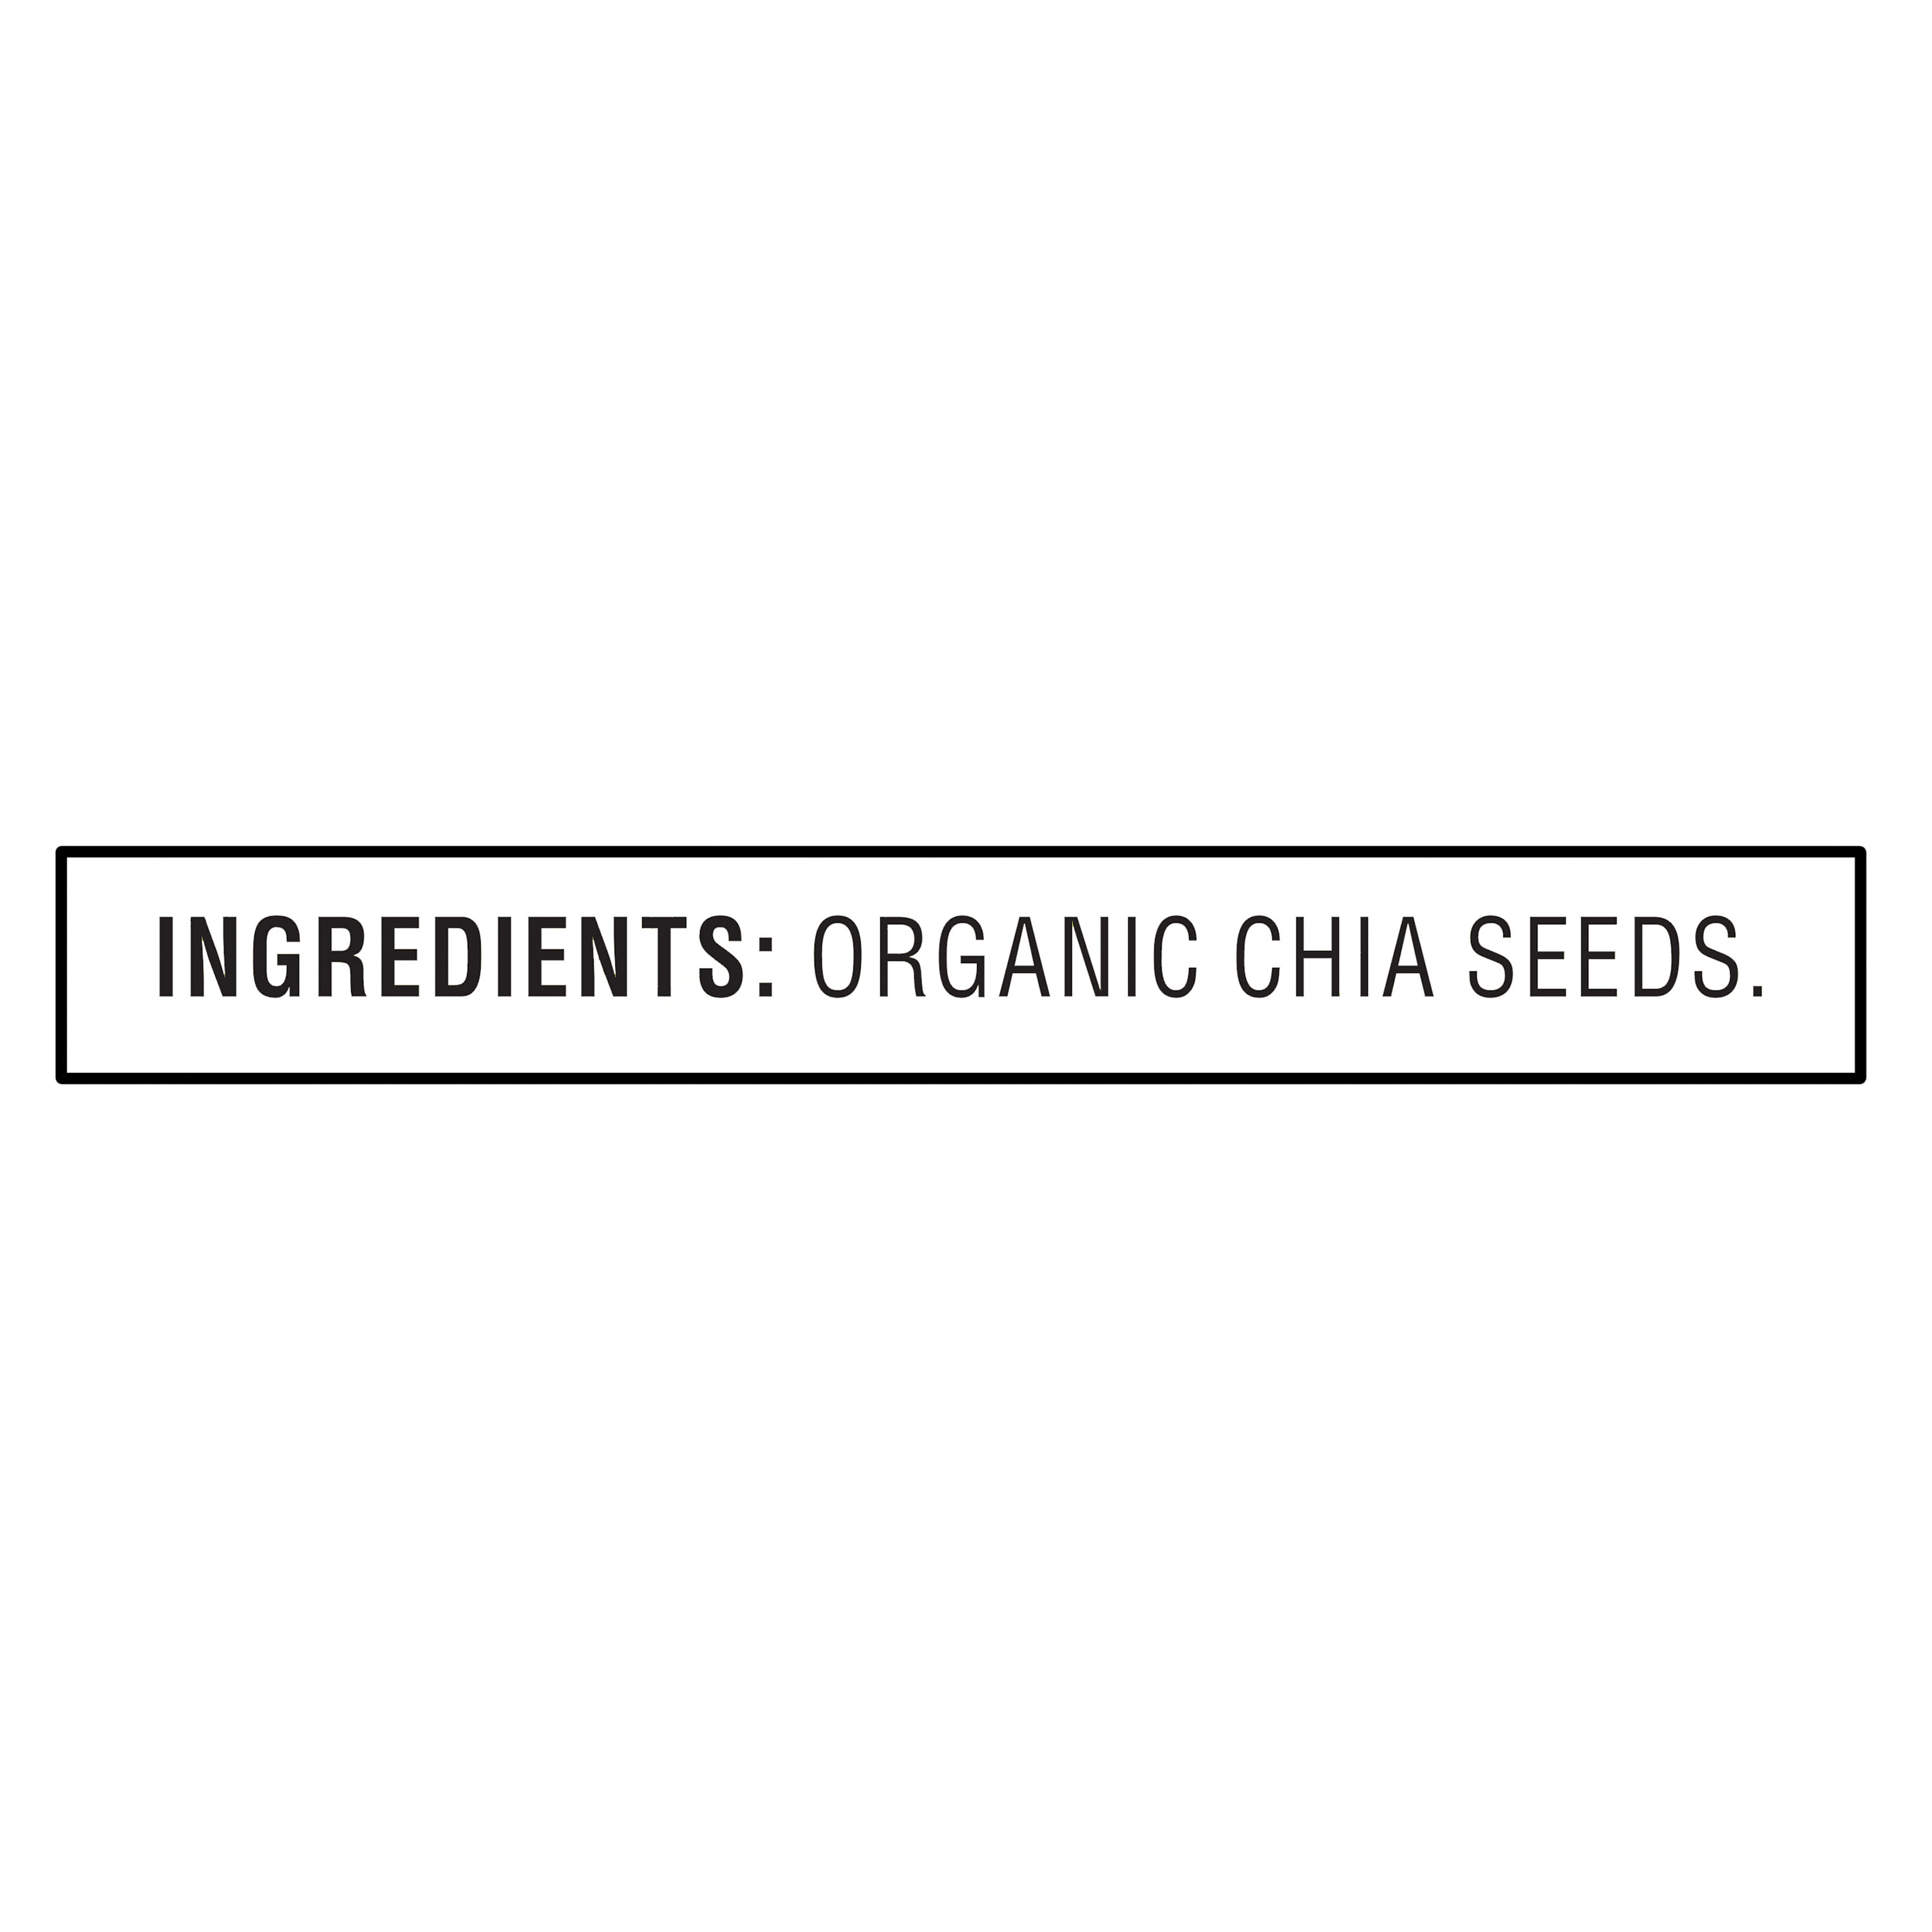 Great Value Organic Chia Seeds, 32 oz - image 4 of 7